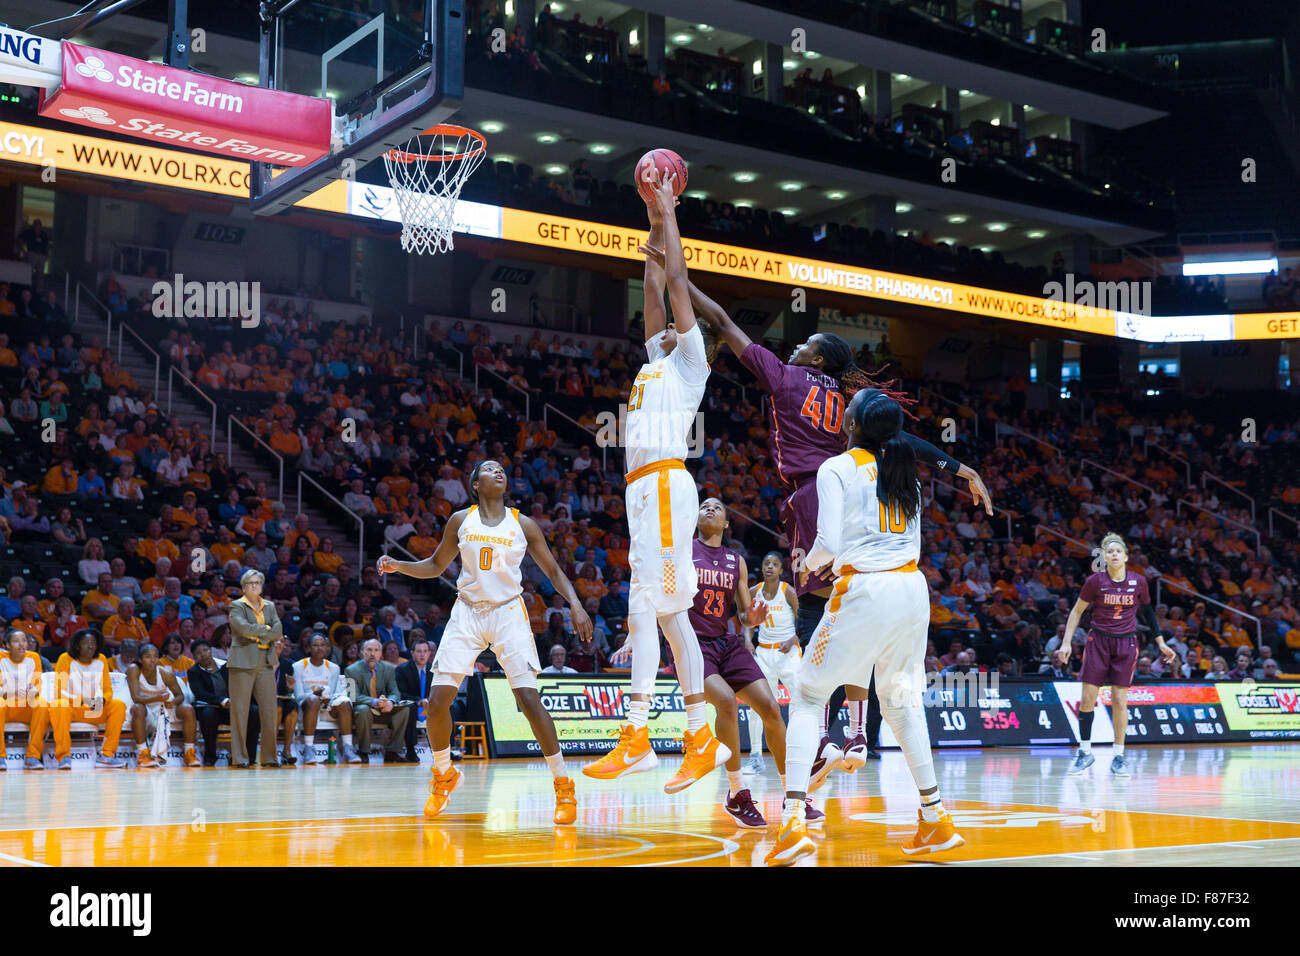 December 6, 2015: Mercedes Russell #21 of the Tennessee Lady Volunteers grabs the rebound from Dominique Powell #40 of the Virginia Tech Hokies during the NCAA basketball game between the University of Tennessee Lady Volunteers and the Virginia Tech Hokies at Thompson Boling Arena in Knoxville TN Tim Gangloff/CSM Stock Photo